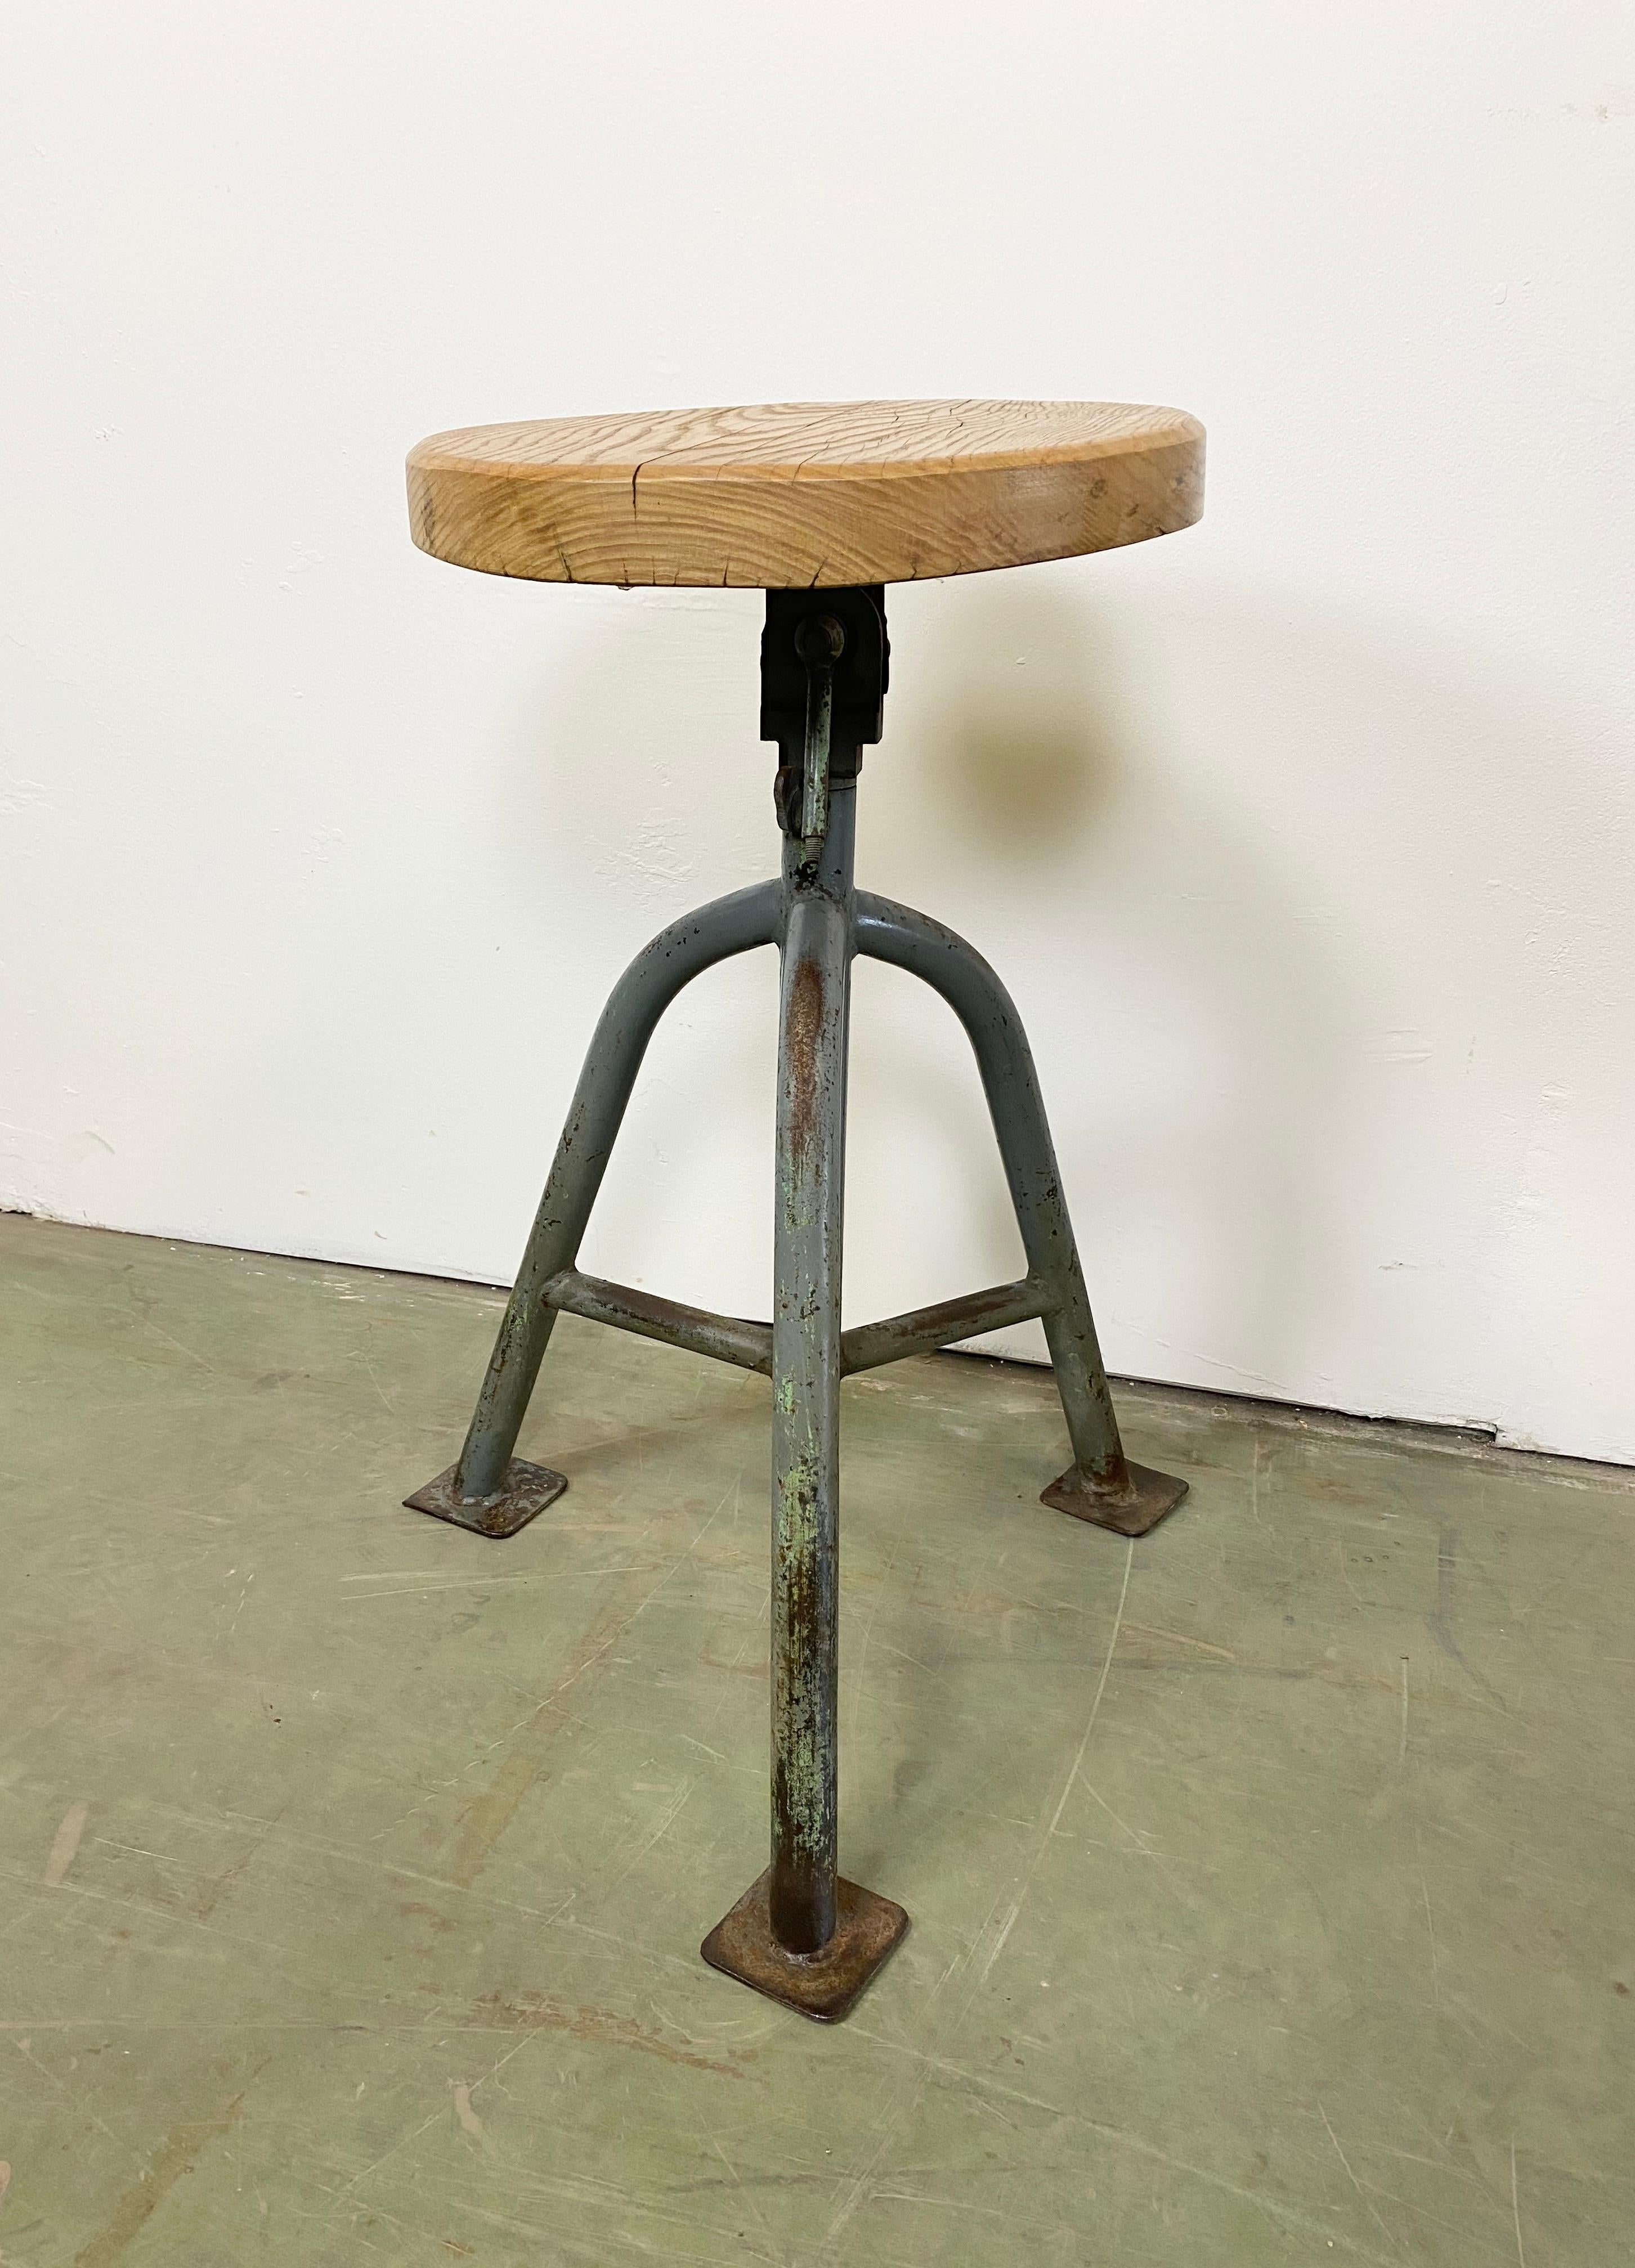 Industrial stool with a wooden seat and grey metal frame. The seat diameter is 37 cm. The weight of the stool is 11 kg.